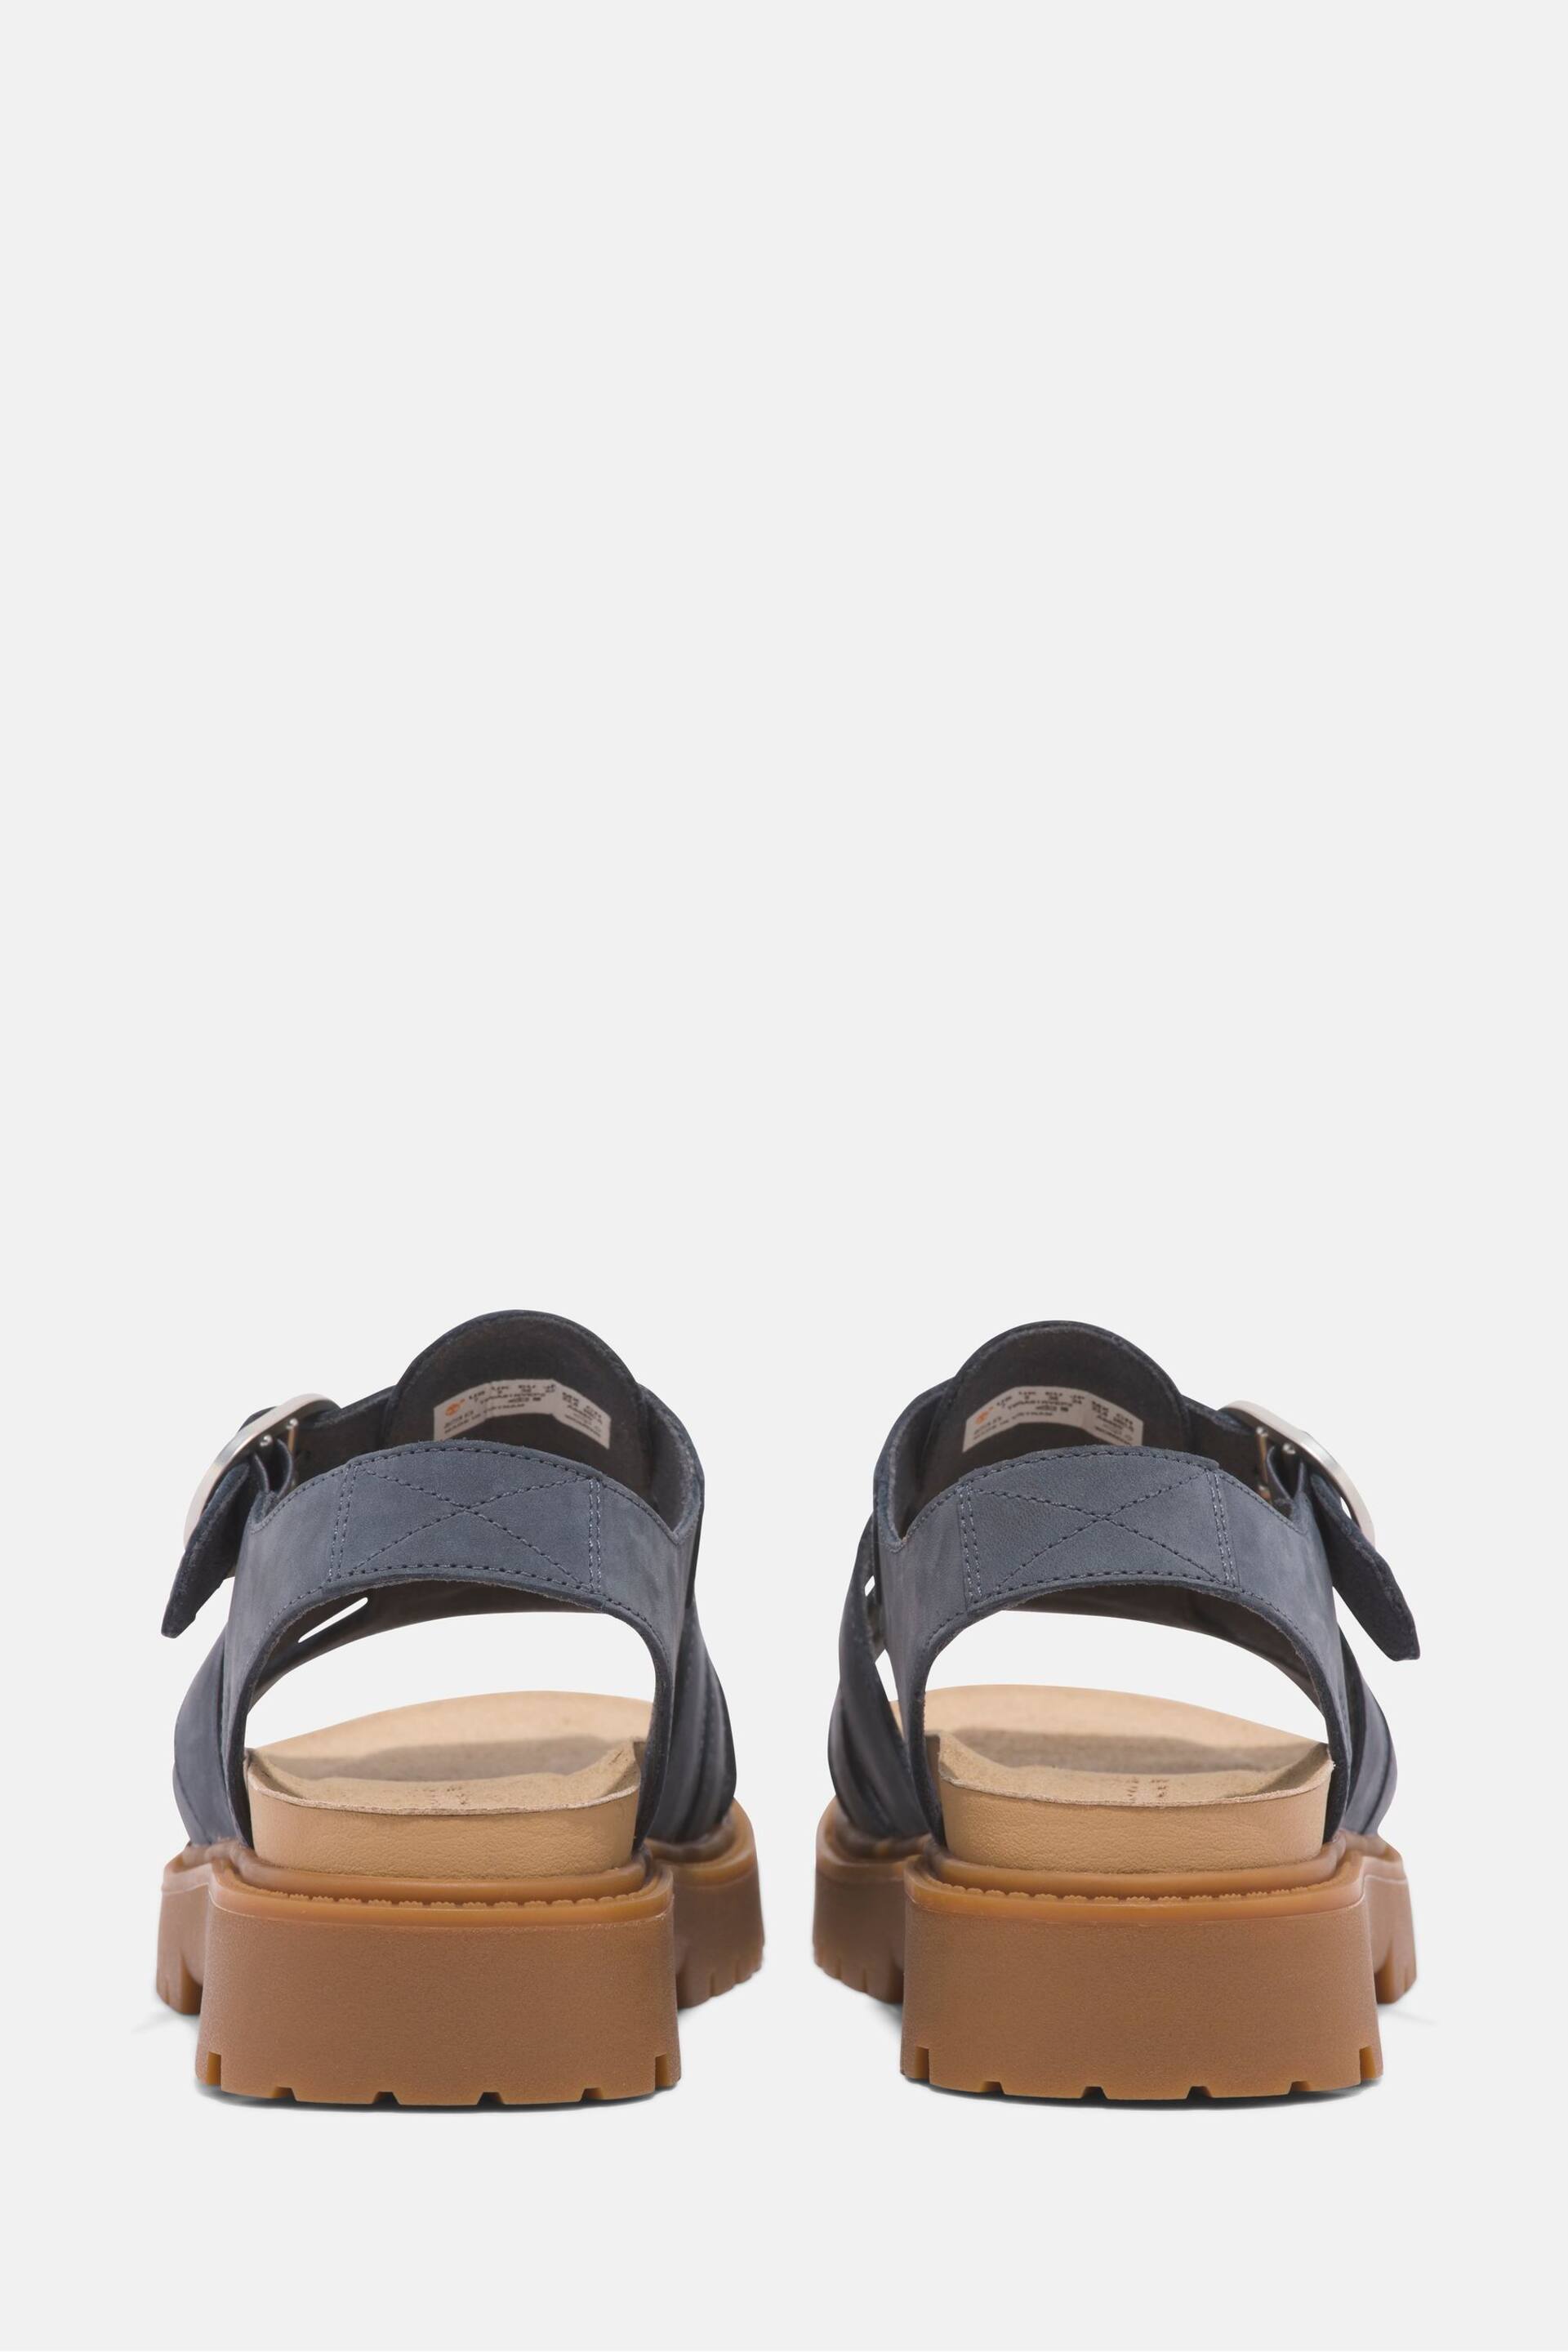 Timberland Blue Clairemont Way Fishernan Sandals - Image 6 of 8